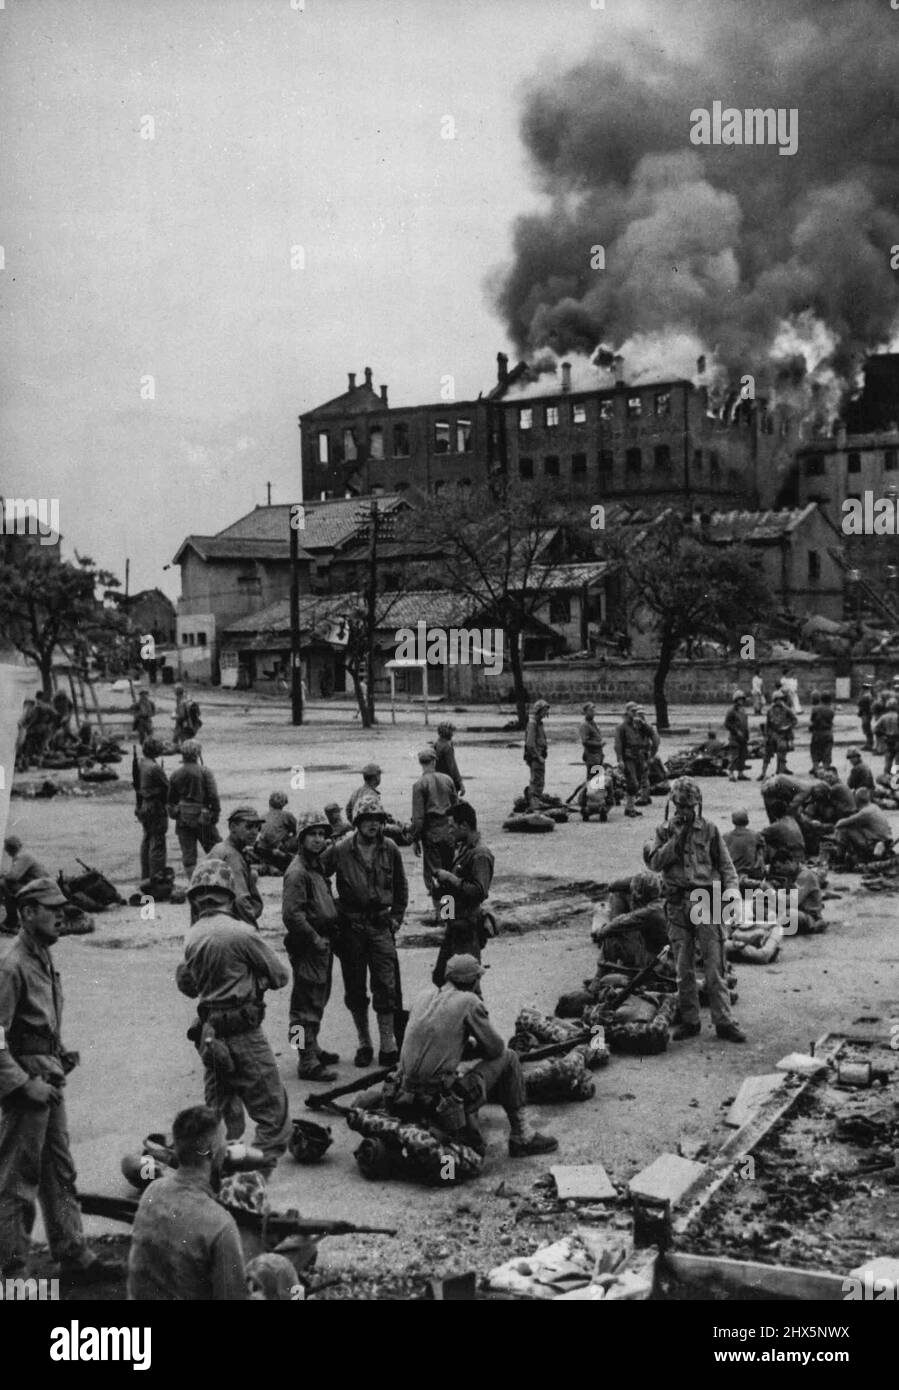 Marines At Inchon -- Troops of the American 1st Marine Division smoke chat and relax while they await orders to move forward in the United Nations drive toward enemy-held Seoul, former capital of South Korea. The Marines are shown here in Inchon, West Coast port from which the Seoul drive has been launched. In the background is a burning tobacco warehouse. (September 16, 1950. Picture received by air today). September 25, 1950. (Photo by Reuterphoto). Stock Photo